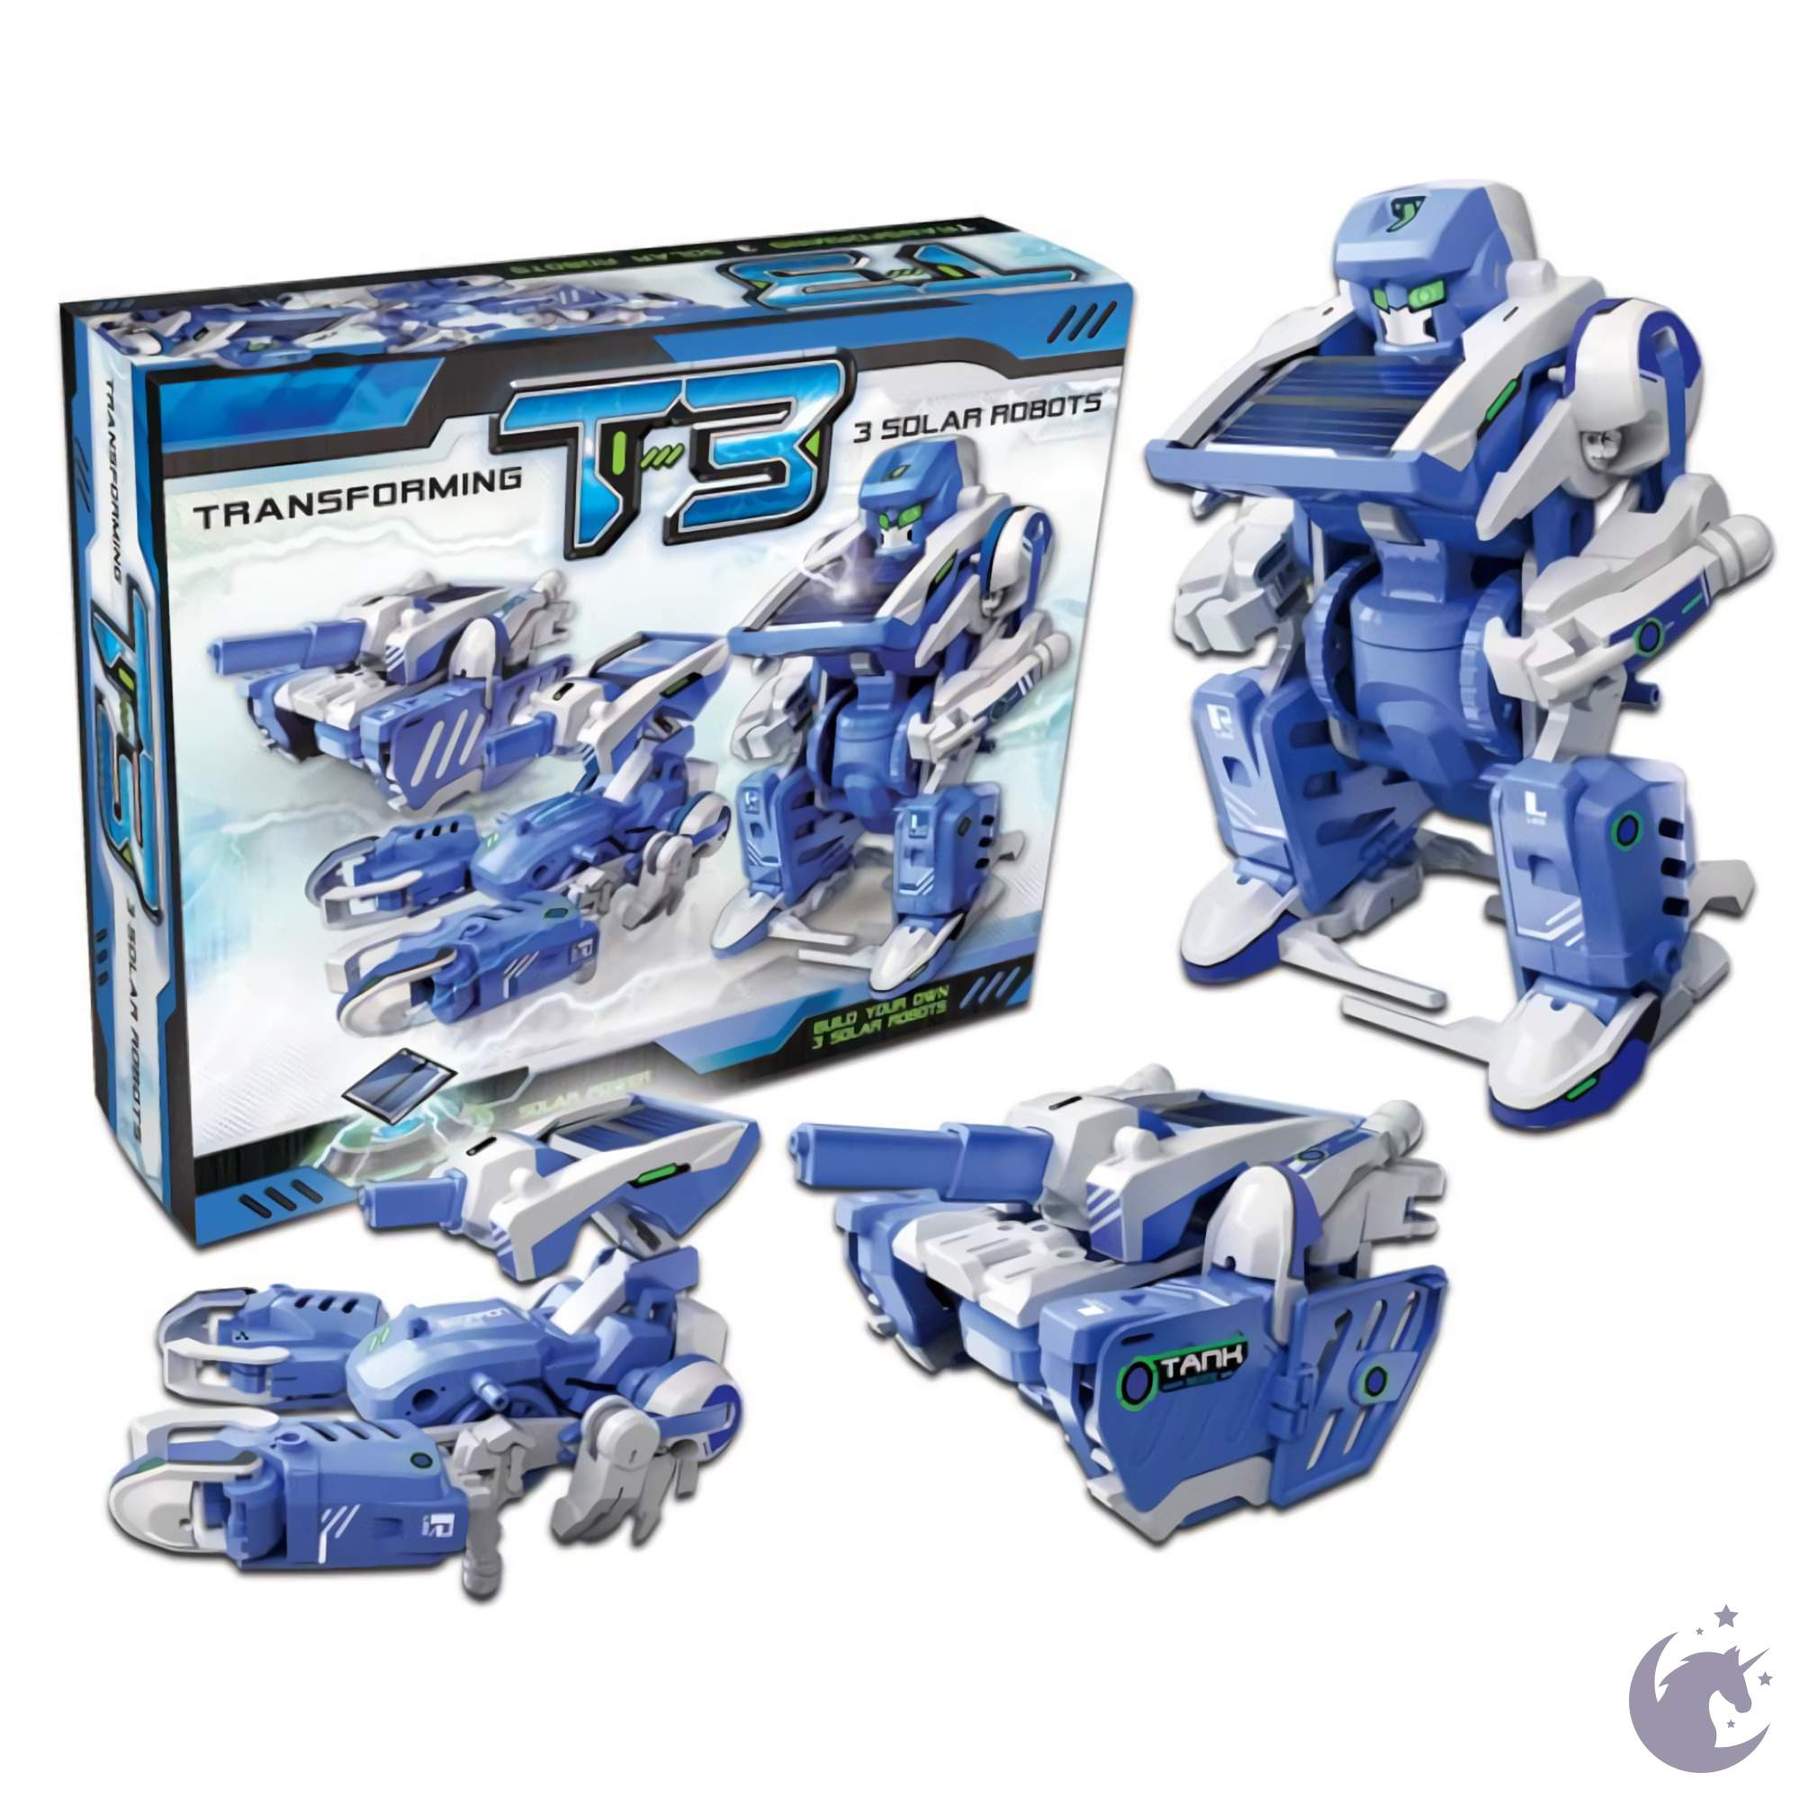 3-in-1 Transforming Solar Robot Ages 10+